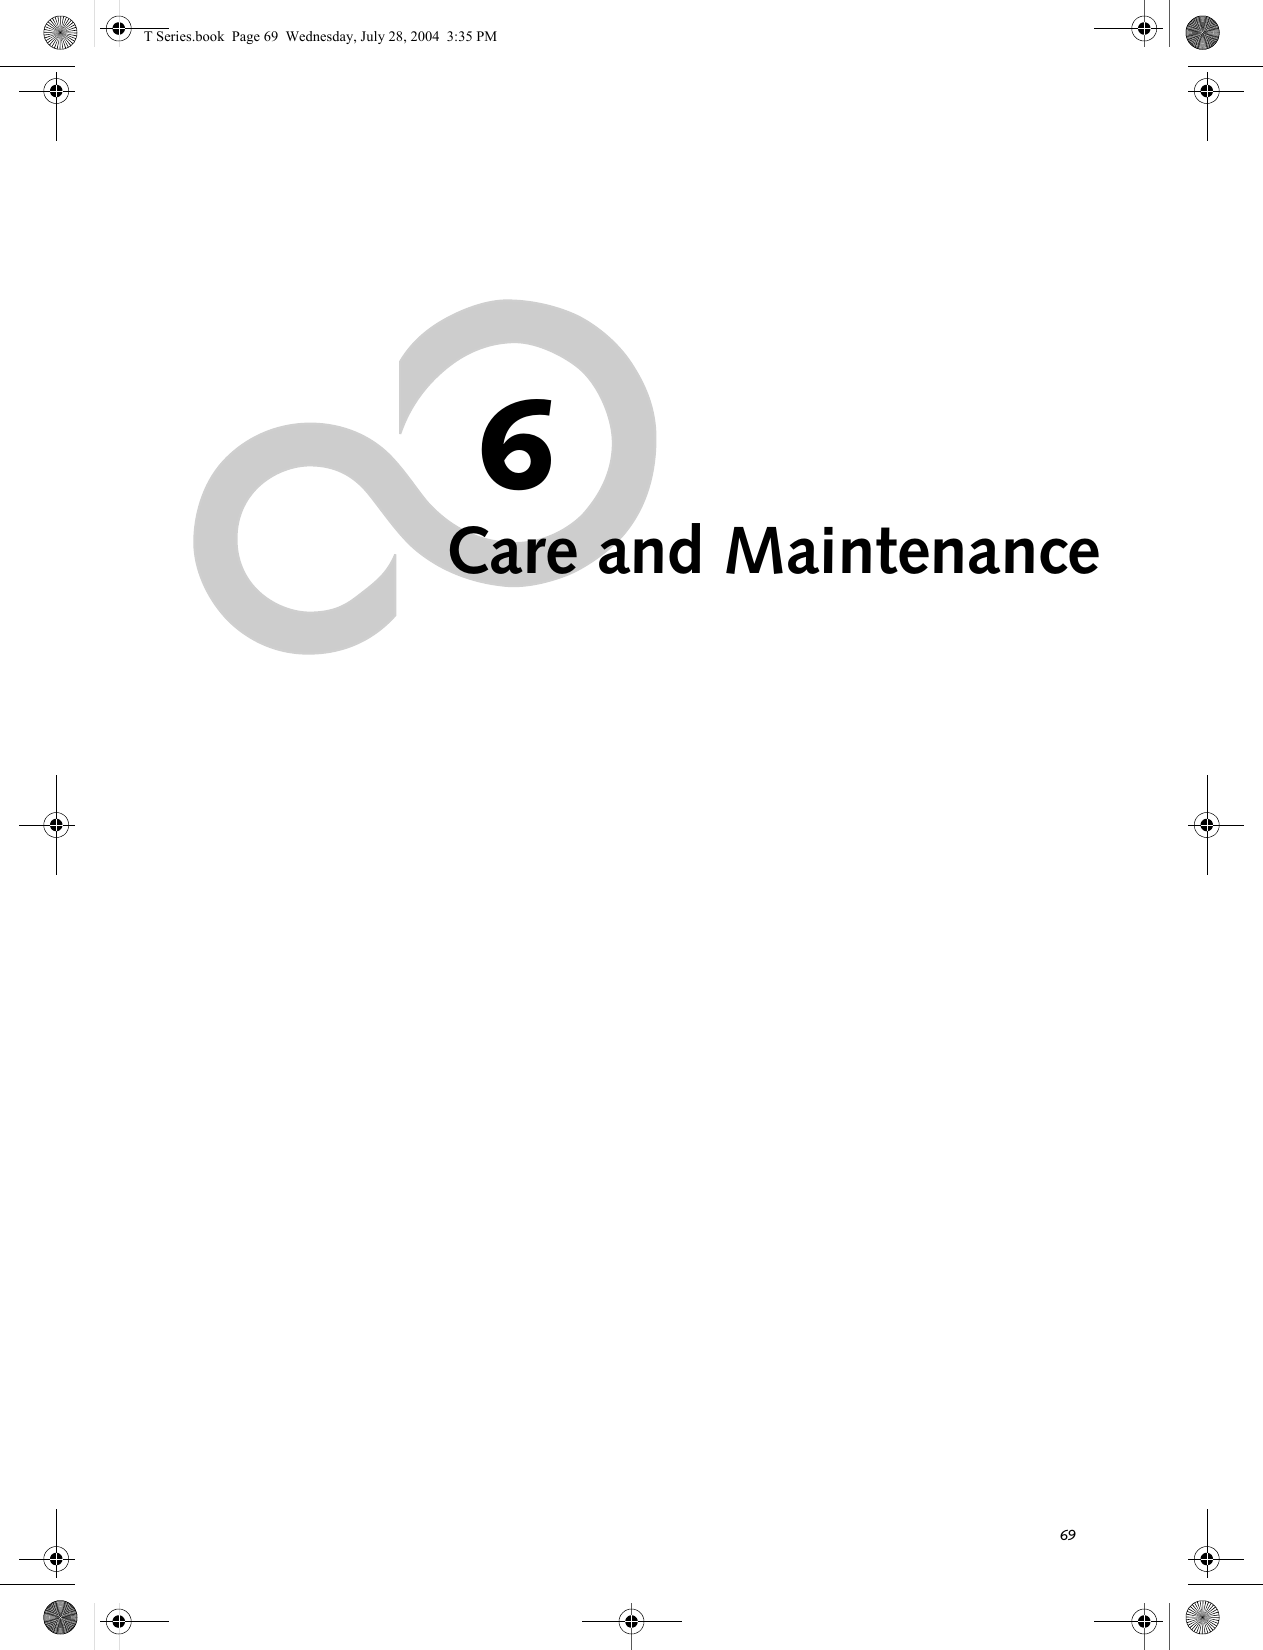 696Care and MaintenanceT Series.book  Page 69  Wednesday, July 28, 2004  3:35 PM